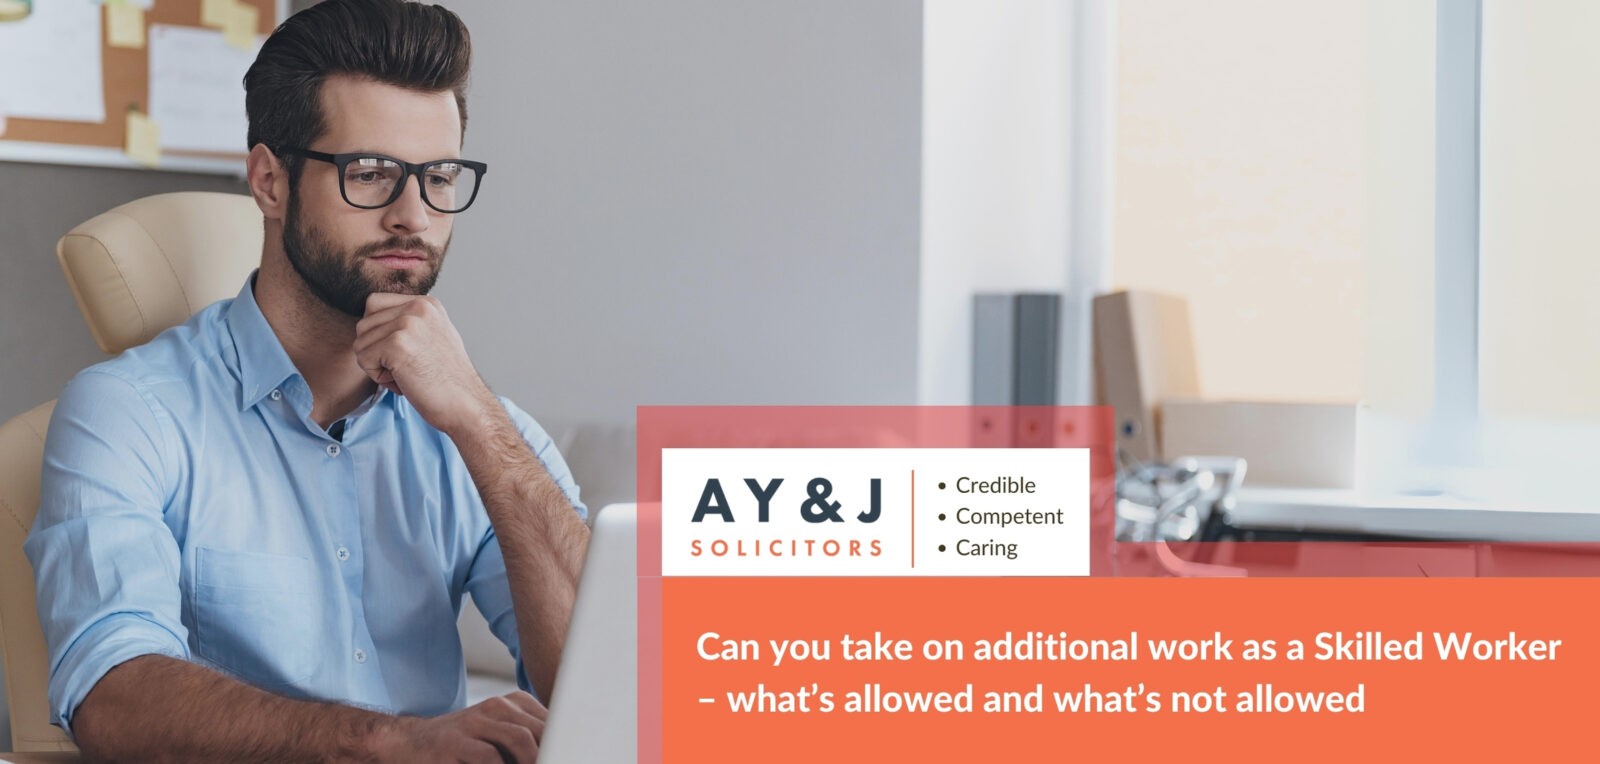 Can you take on additional work as a Skilled Worker – what’s allowed and what’s not allowed